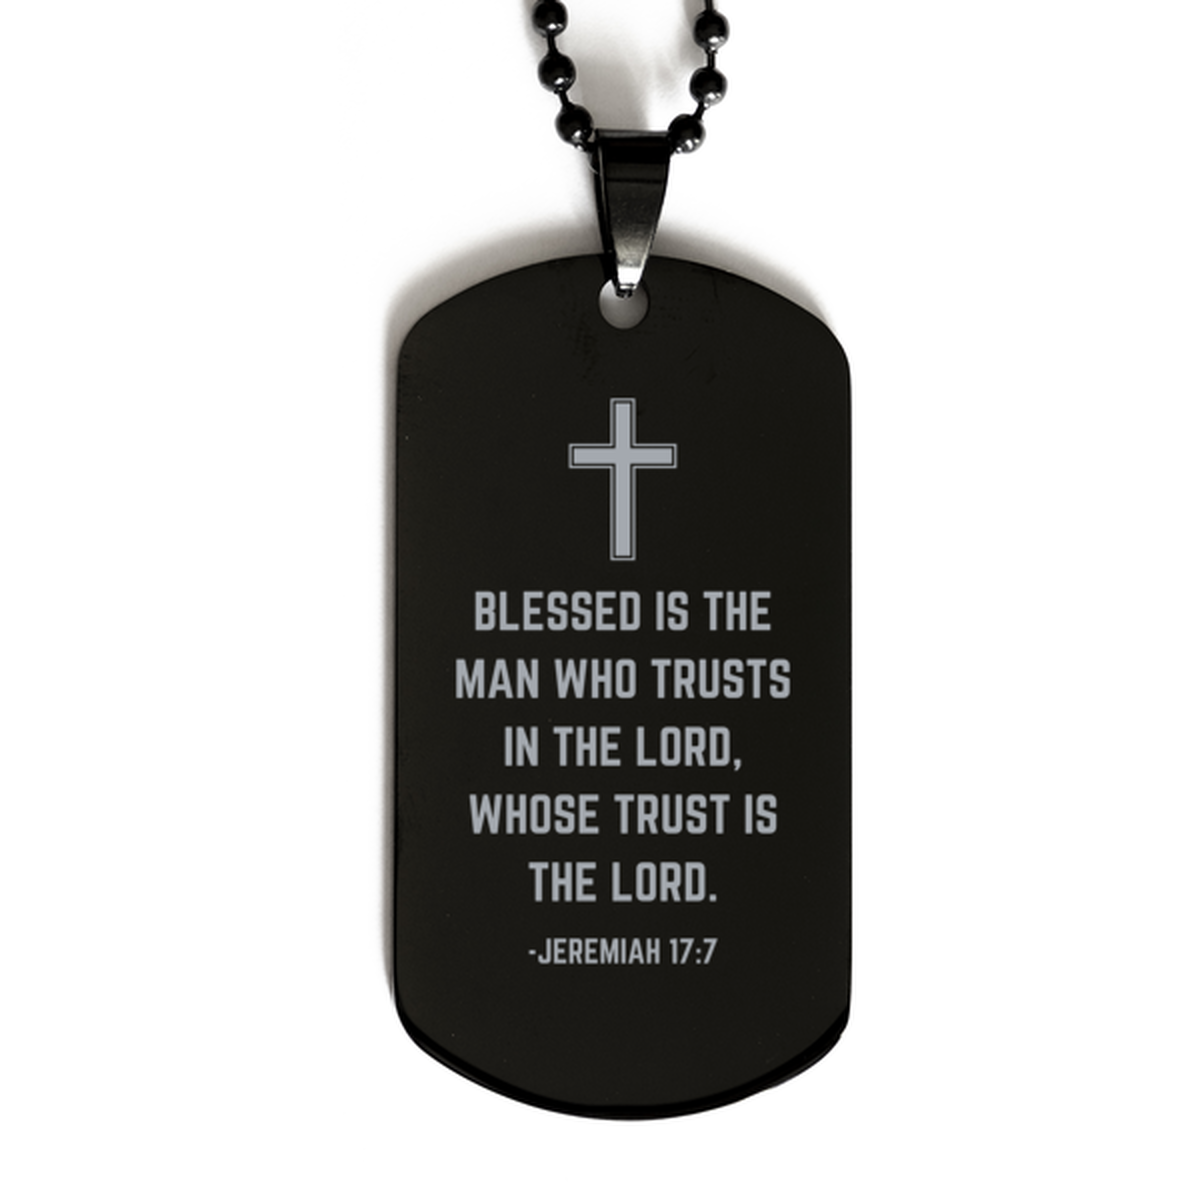 Baptism Gifts For Teenage Boys Girls, Christian Bible Verse Black Dog Tag, Blessed is the man who trusts, Confirmation Gifts, Bible Verse Necklace for Son, Godson, Grandson, Nephew